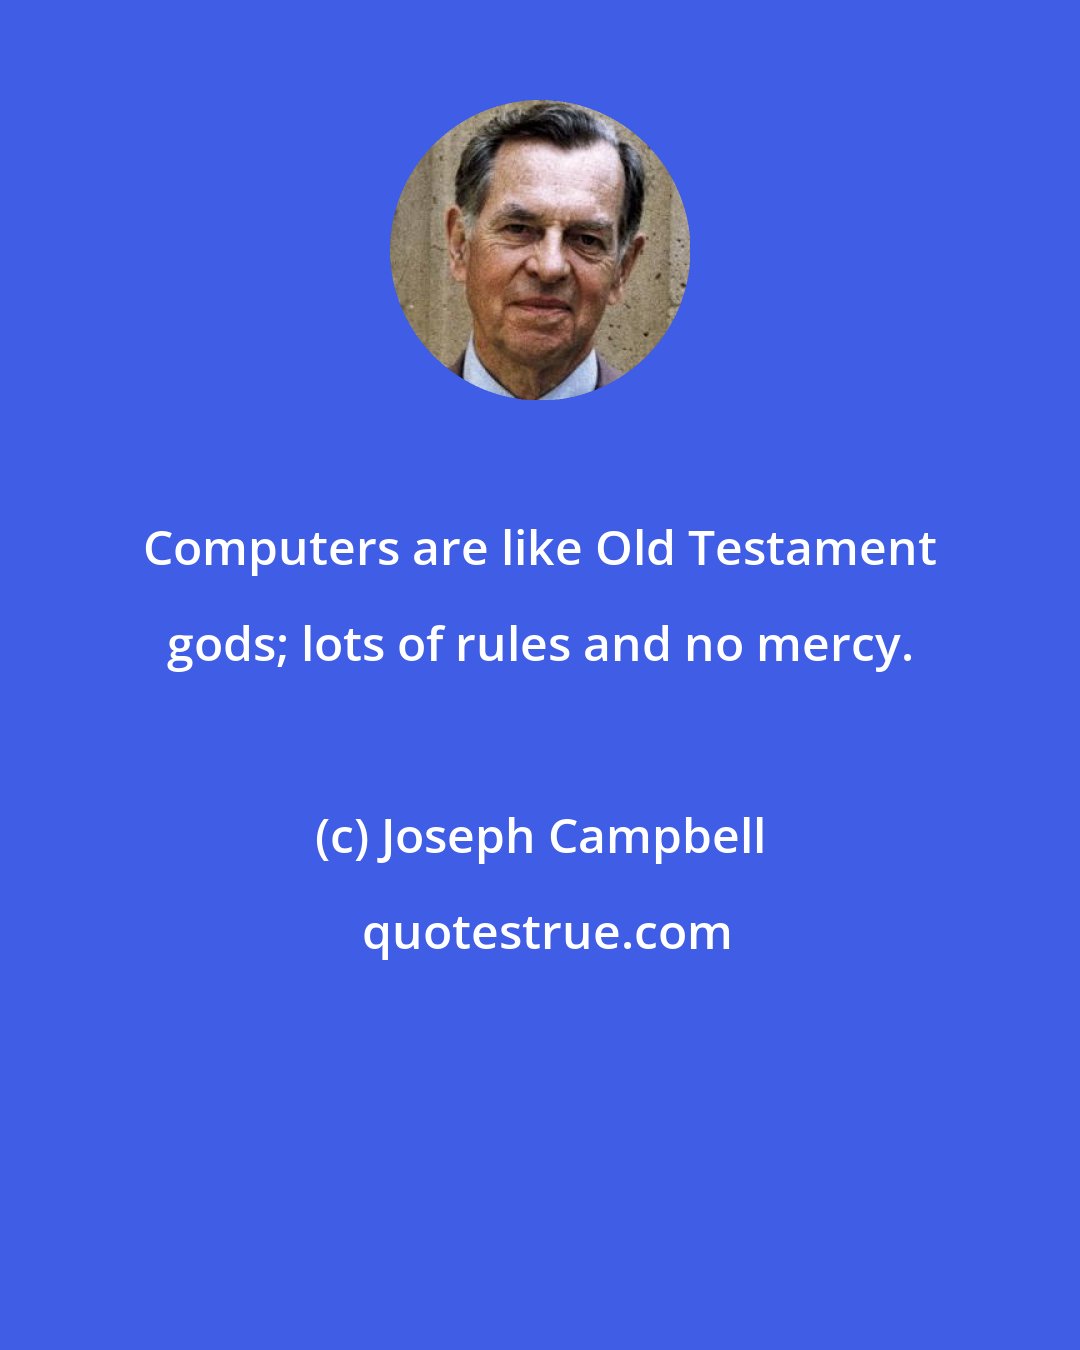 Joseph Campbell: Computers are like Old Testament gods; lots of rules and no mercy.